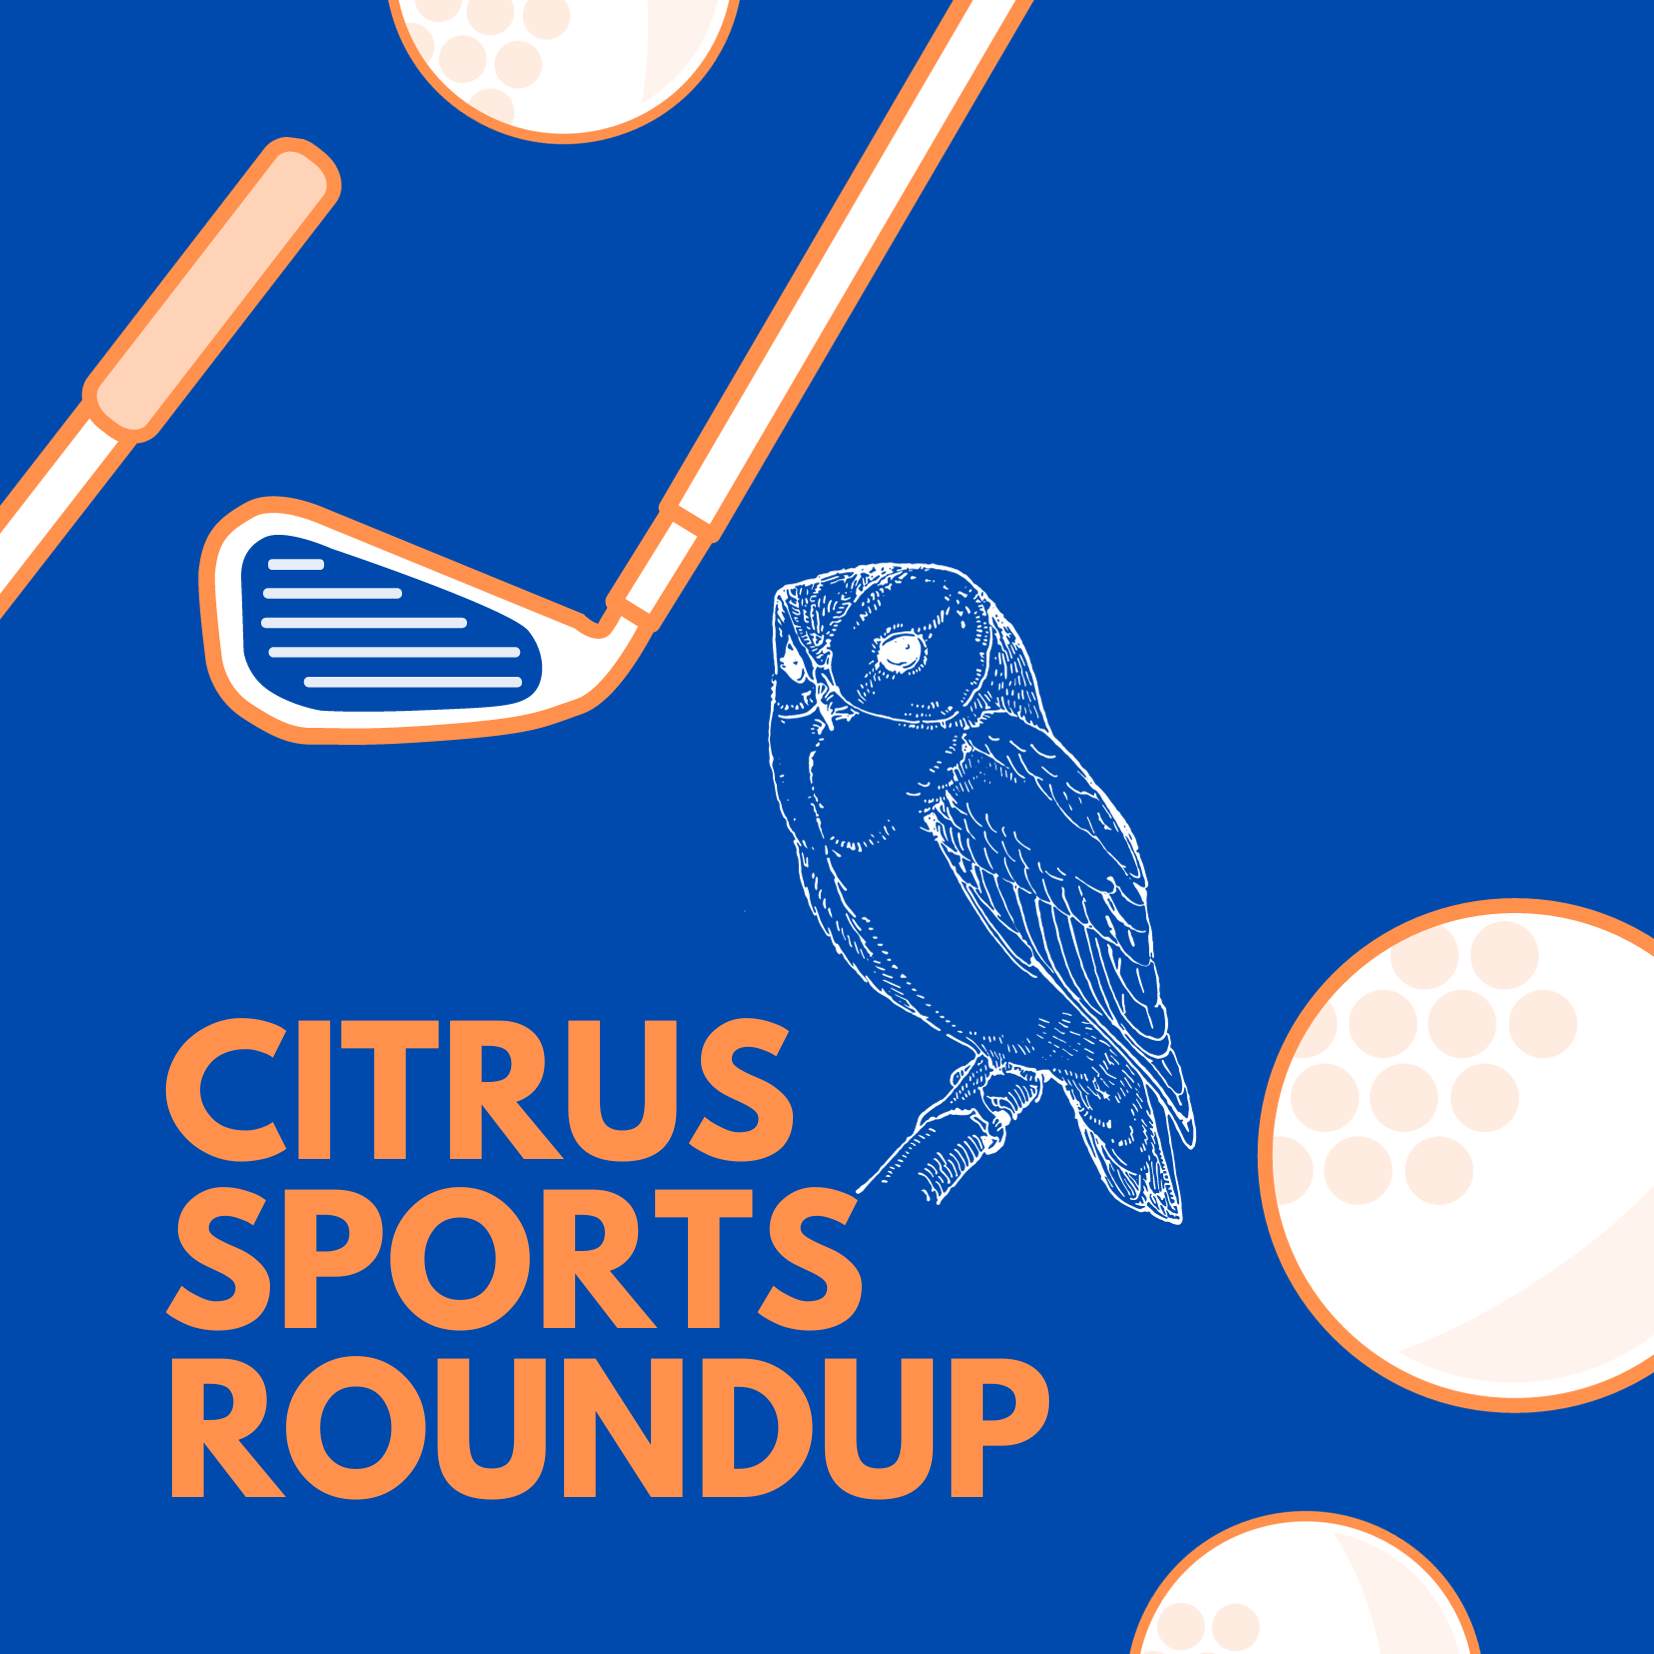 Citrus sports roundup: Isabelle Olivas-Lowell scores a 73 for golf win